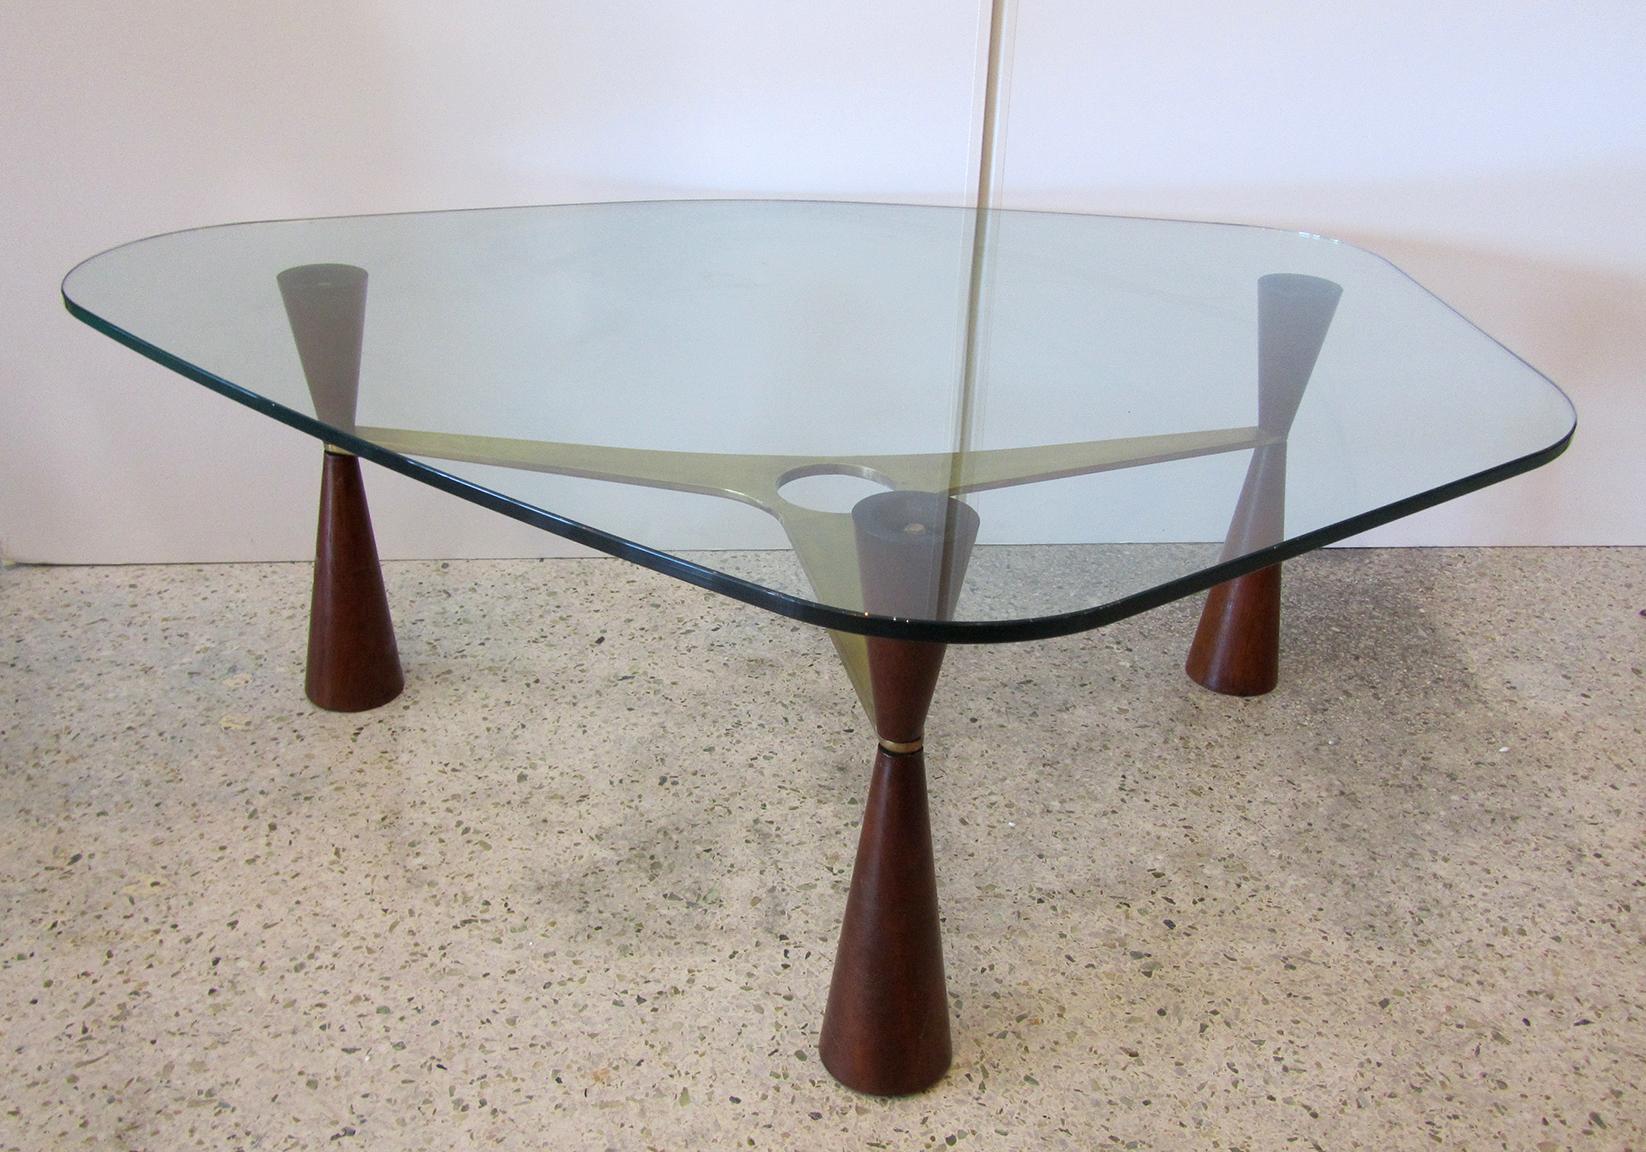 A beautiful and unusual coffee table by Ed Wormley for Dunbar. A freeform glass top sits on top of 3 tapering legs divided by a brass stretcher with a circular cutout. There is beautiful brass hardware throughout the piece. Dimensions of base alone: